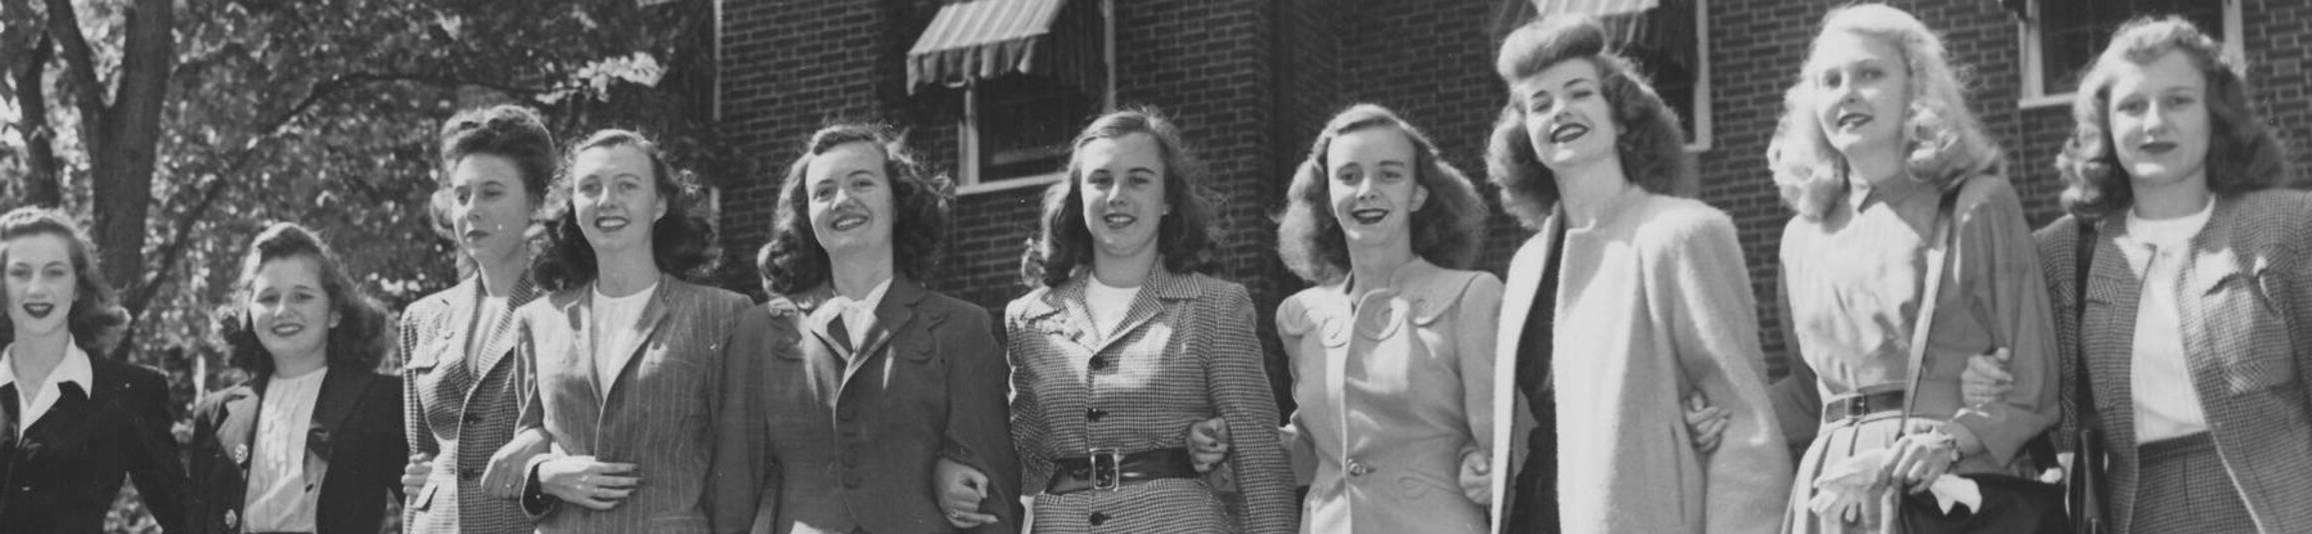 Ursuline college old photo of students in the 1940s3